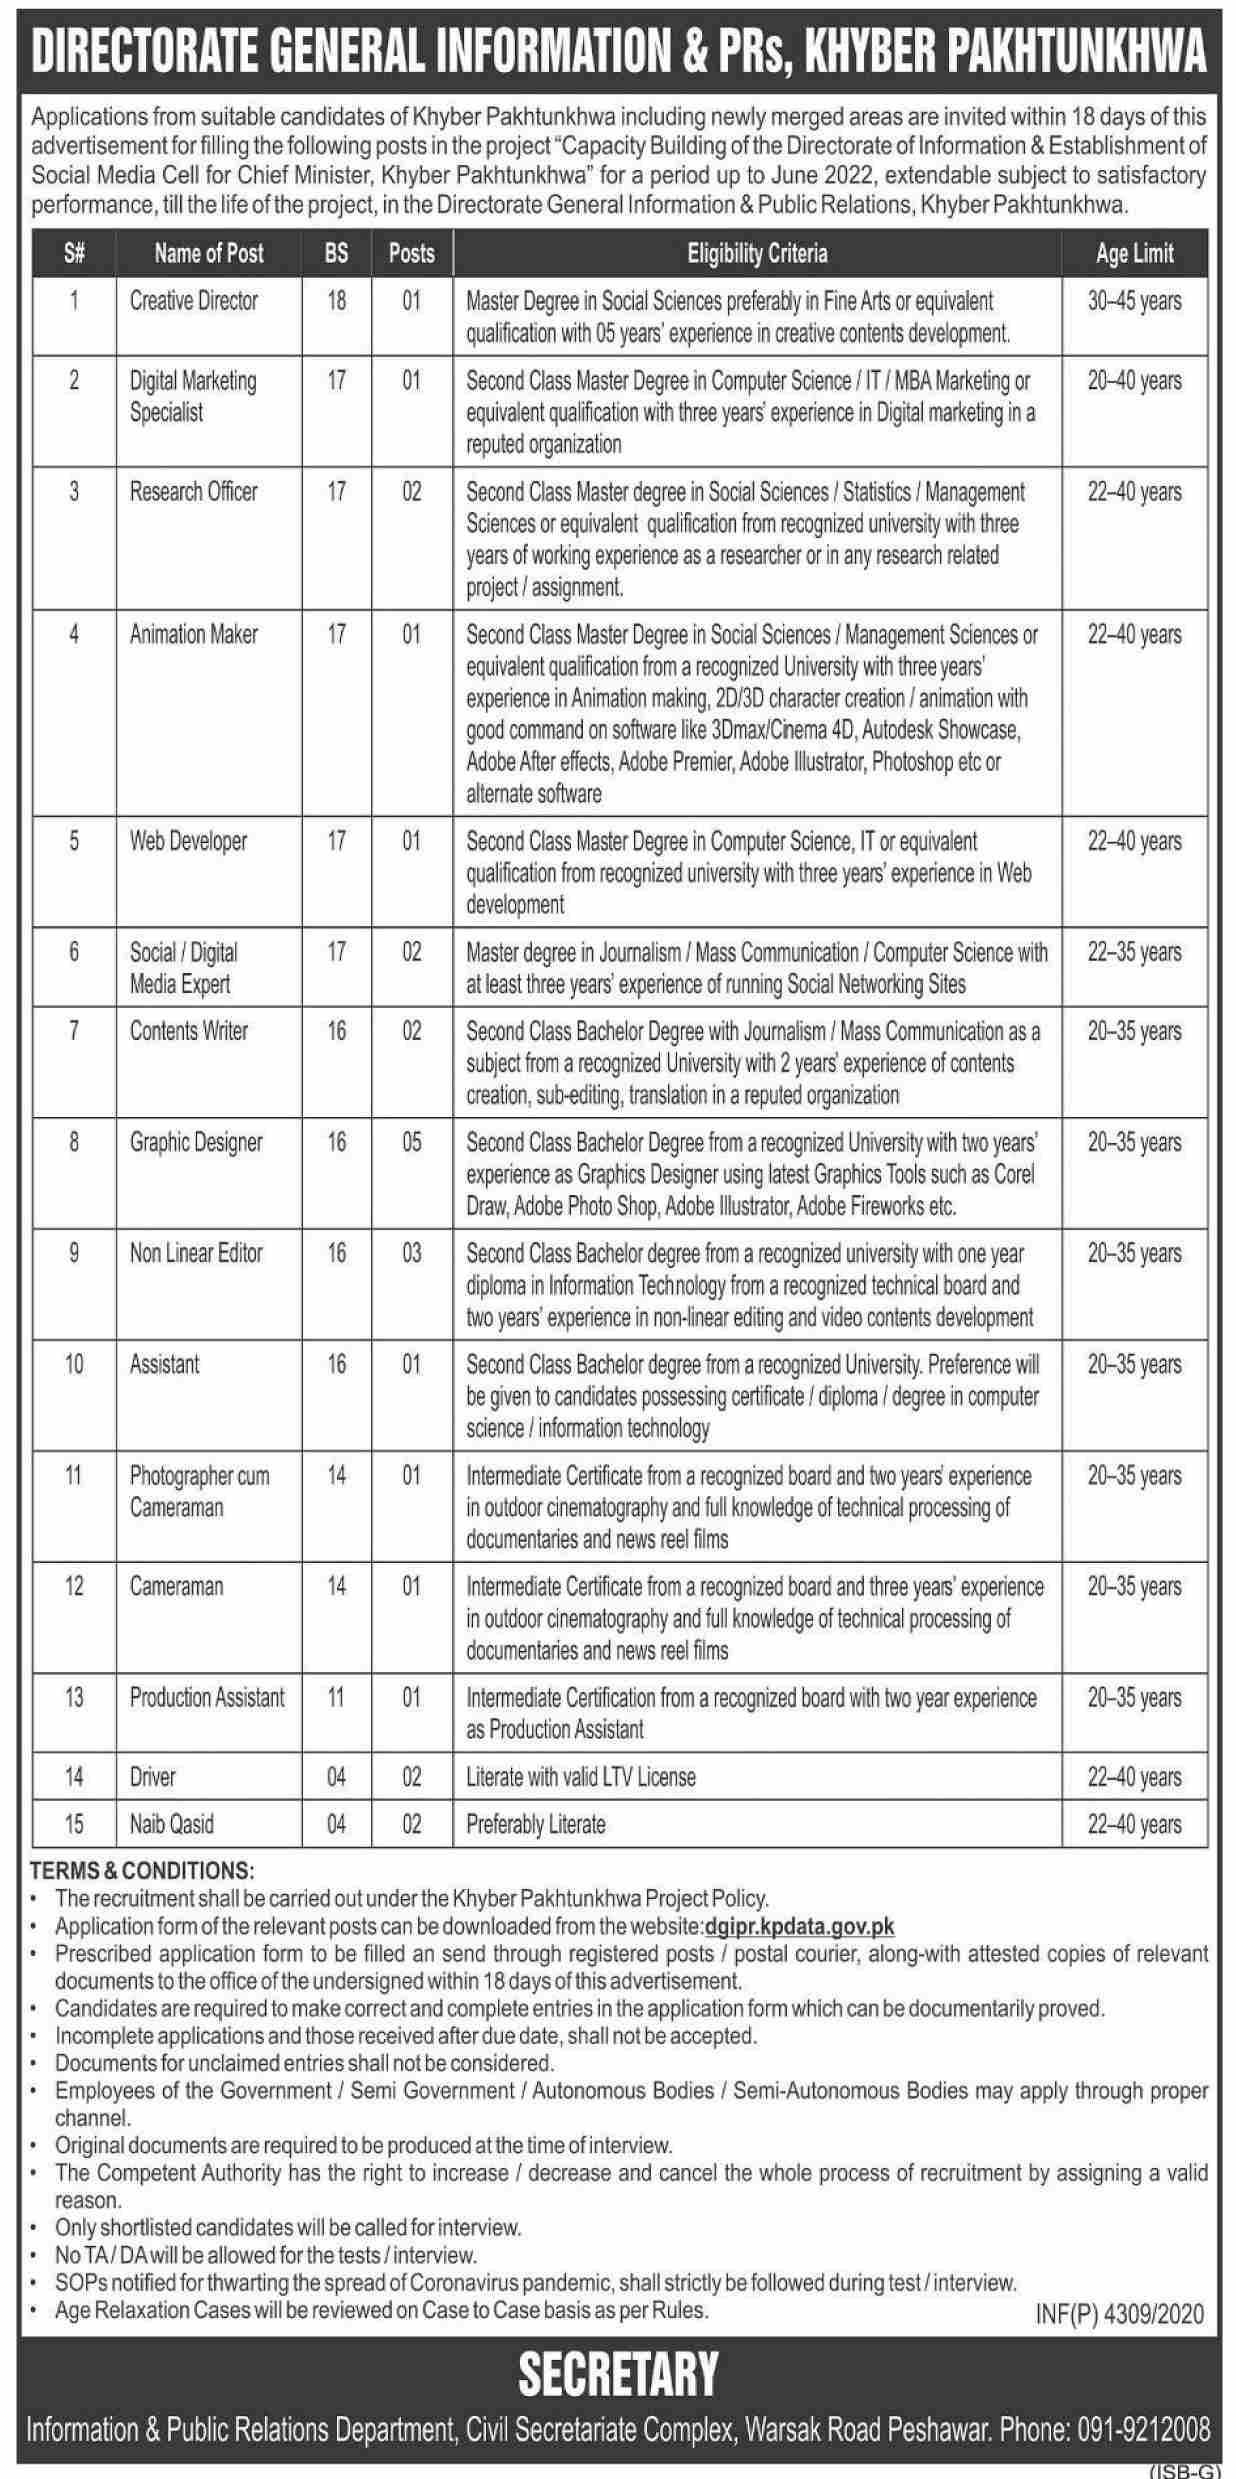 Information and Public Relations Department KPK Jobs 2020 November Application Form Graphic Designer & Others Latest